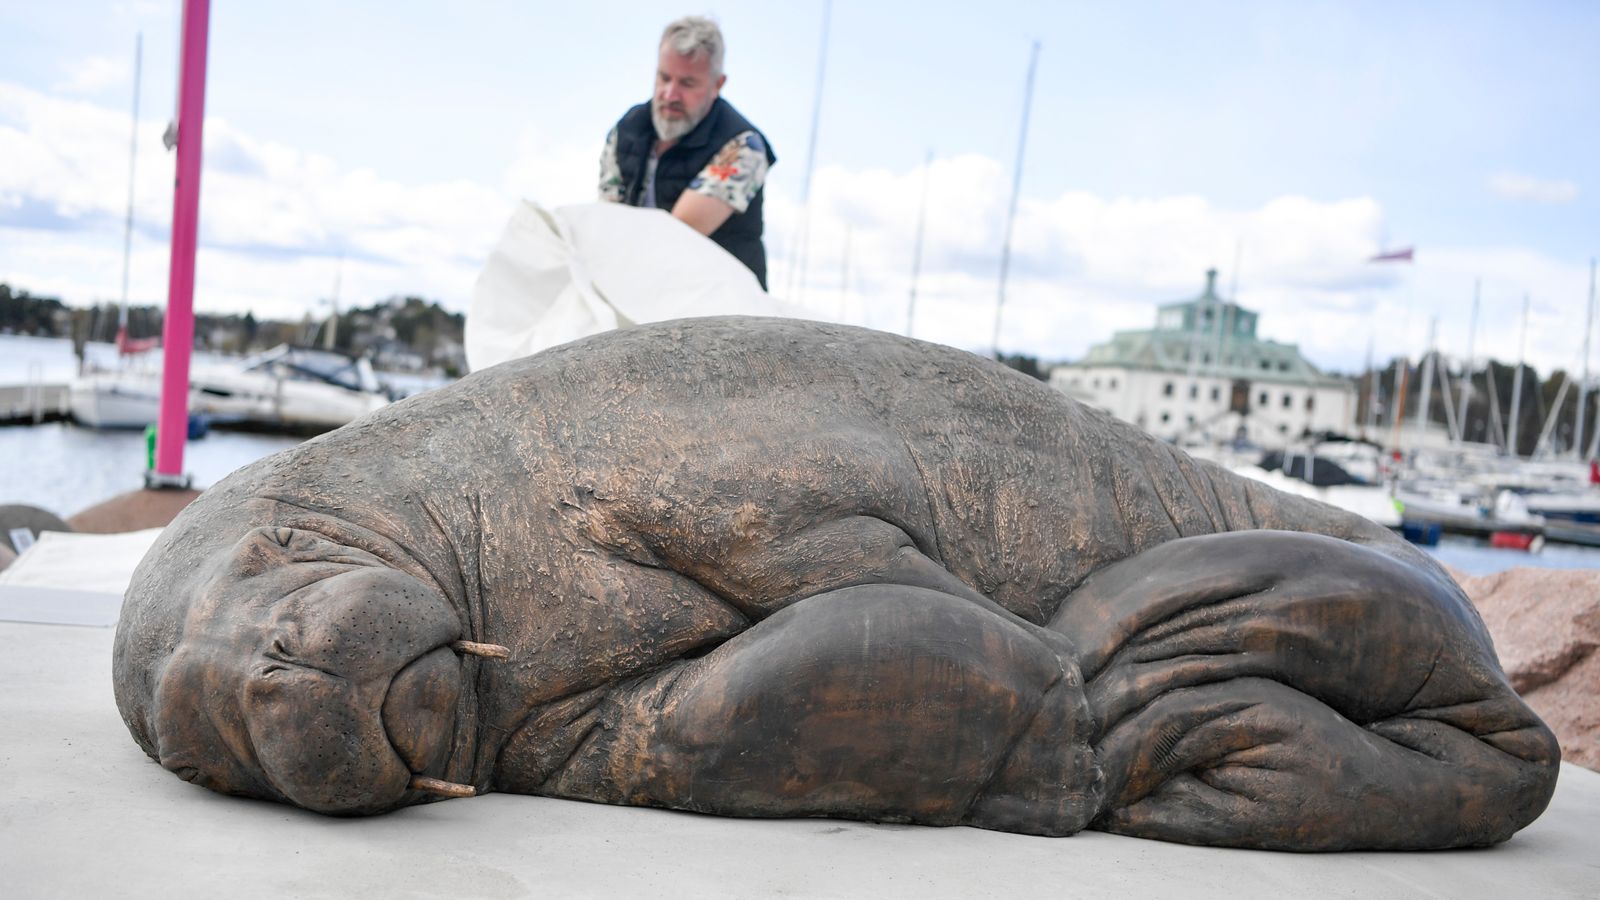 Freya the walrus: Celebrity mammal which was put down in Norway honoured with life-size sculpture